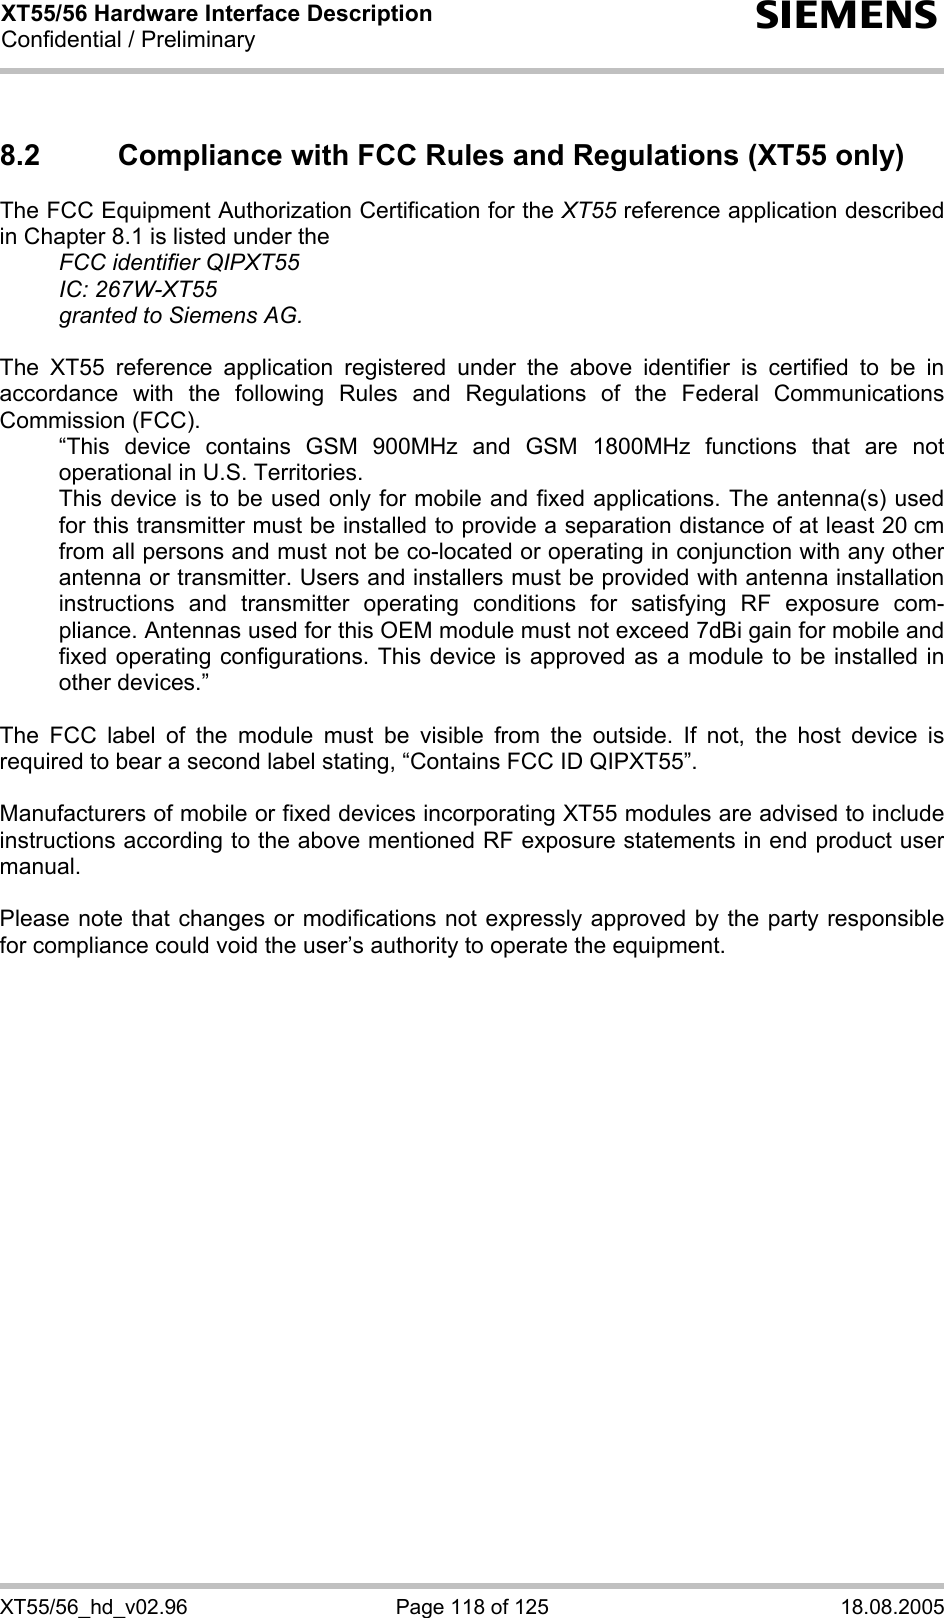 XT55/56 Hardware Interface Description Confidential / Preliminary s XT55/56_hd_v02.96  Page 118 of 125  18.08.2005 8.2  Compliance with FCC Rules and Regulations (XT55 only) The FCC Equipment Authorization Certification for the XT55 reference application described in Chapter 8.1 is listed under the   FCC identifier QIPXT55  IC: 267W-XT55   granted to Siemens AG.   The XT55 reference application registered under the above identifier is certified to be in accordance with the following Rules and Regulations of the Federal Communications Commission (FCC).    “This device contains GSM 900MHz and GSM 1800MHz functions that are not operational in U.S. Territories.    This device is to be used only for mobile and fixed applications. The antenna(s) used for this transmitter must be installed to provide a separation distance of at least 20 cm from all persons and must not be co-located or operating in conjunction with any other antenna or transmitter. Users and installers must be provided with antenna installation instructions and transmitter operating conditions for satisfying RF exposure com-pliance. Antennas used for this OEM module must not exceed 7dBi gain for mobile and fixed operating configurations. This device is approved as a module to be installed in other devices.”  The FCC label of the module must be visible from the outside. If not, the host device is required to bear a second label stating, “Contains FCC ID QIPXT55”.  Manufacturers of mobile or fixed devices incorporating XT55 modules are advised to include instructions according to the above mentioned RF exposure statements in end product user manual.  Please note that changes or modifications not expressly approved by the party responsible for compliance could void the user’s authority to operate the equipment.  